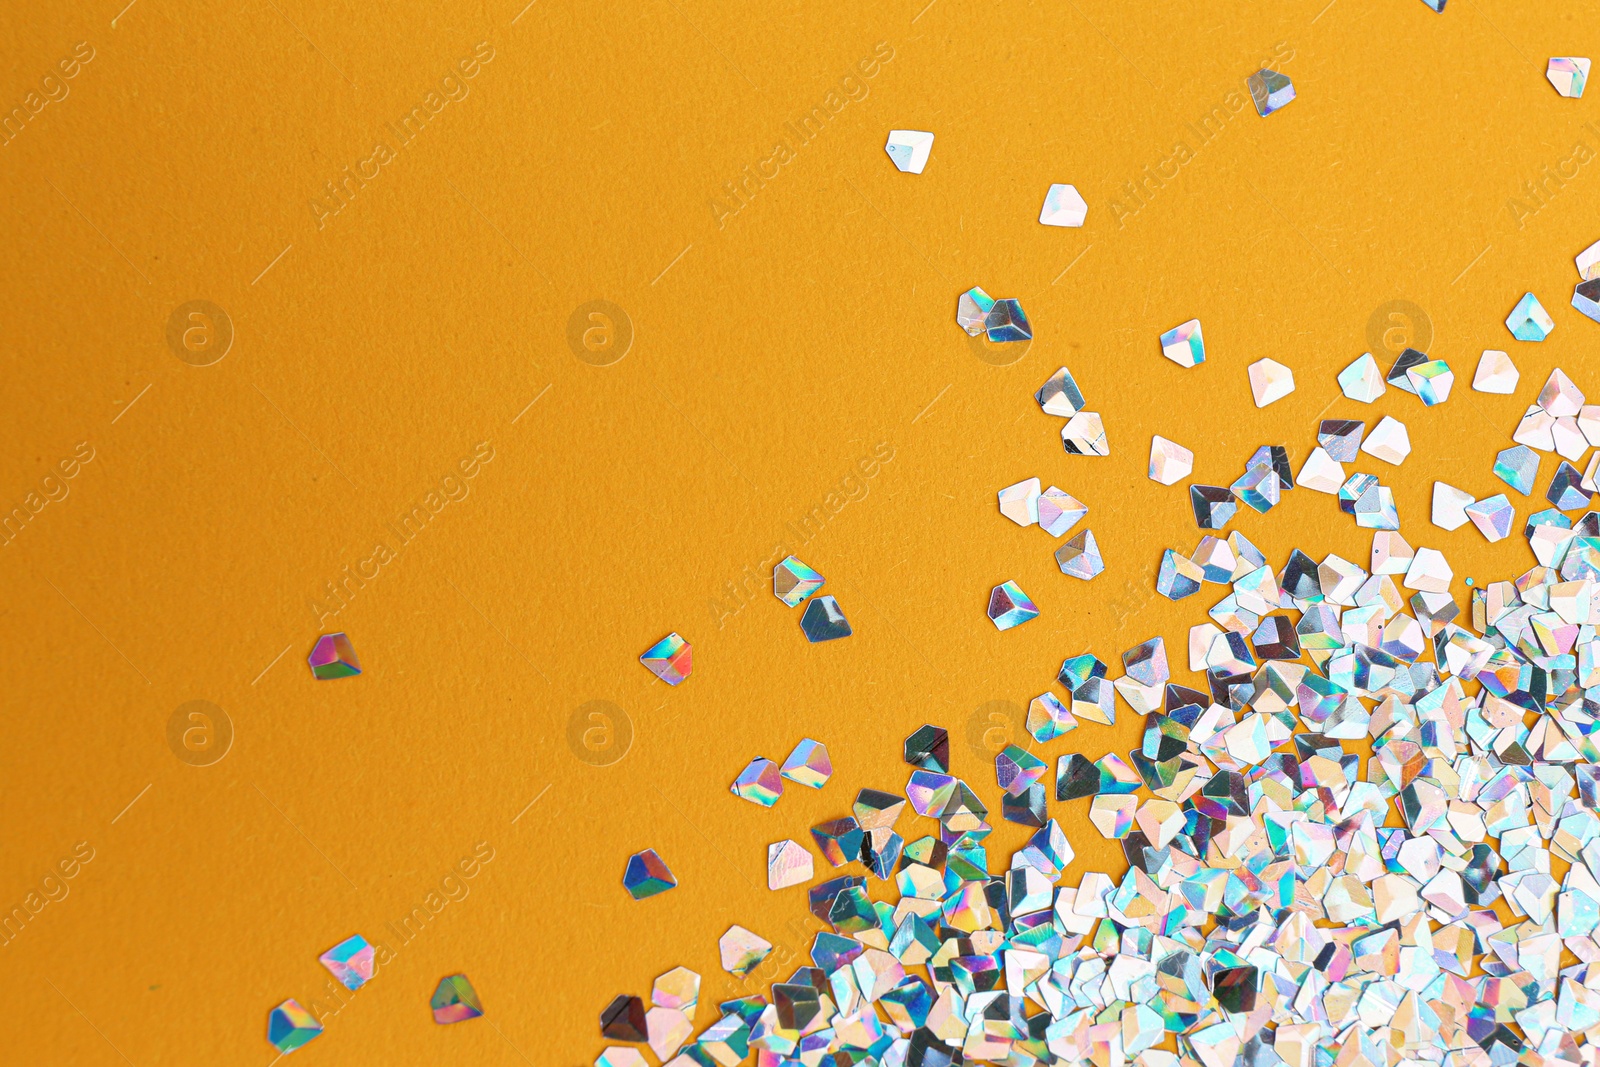 Photo of Shiny bright glitter on orange background. Space for text